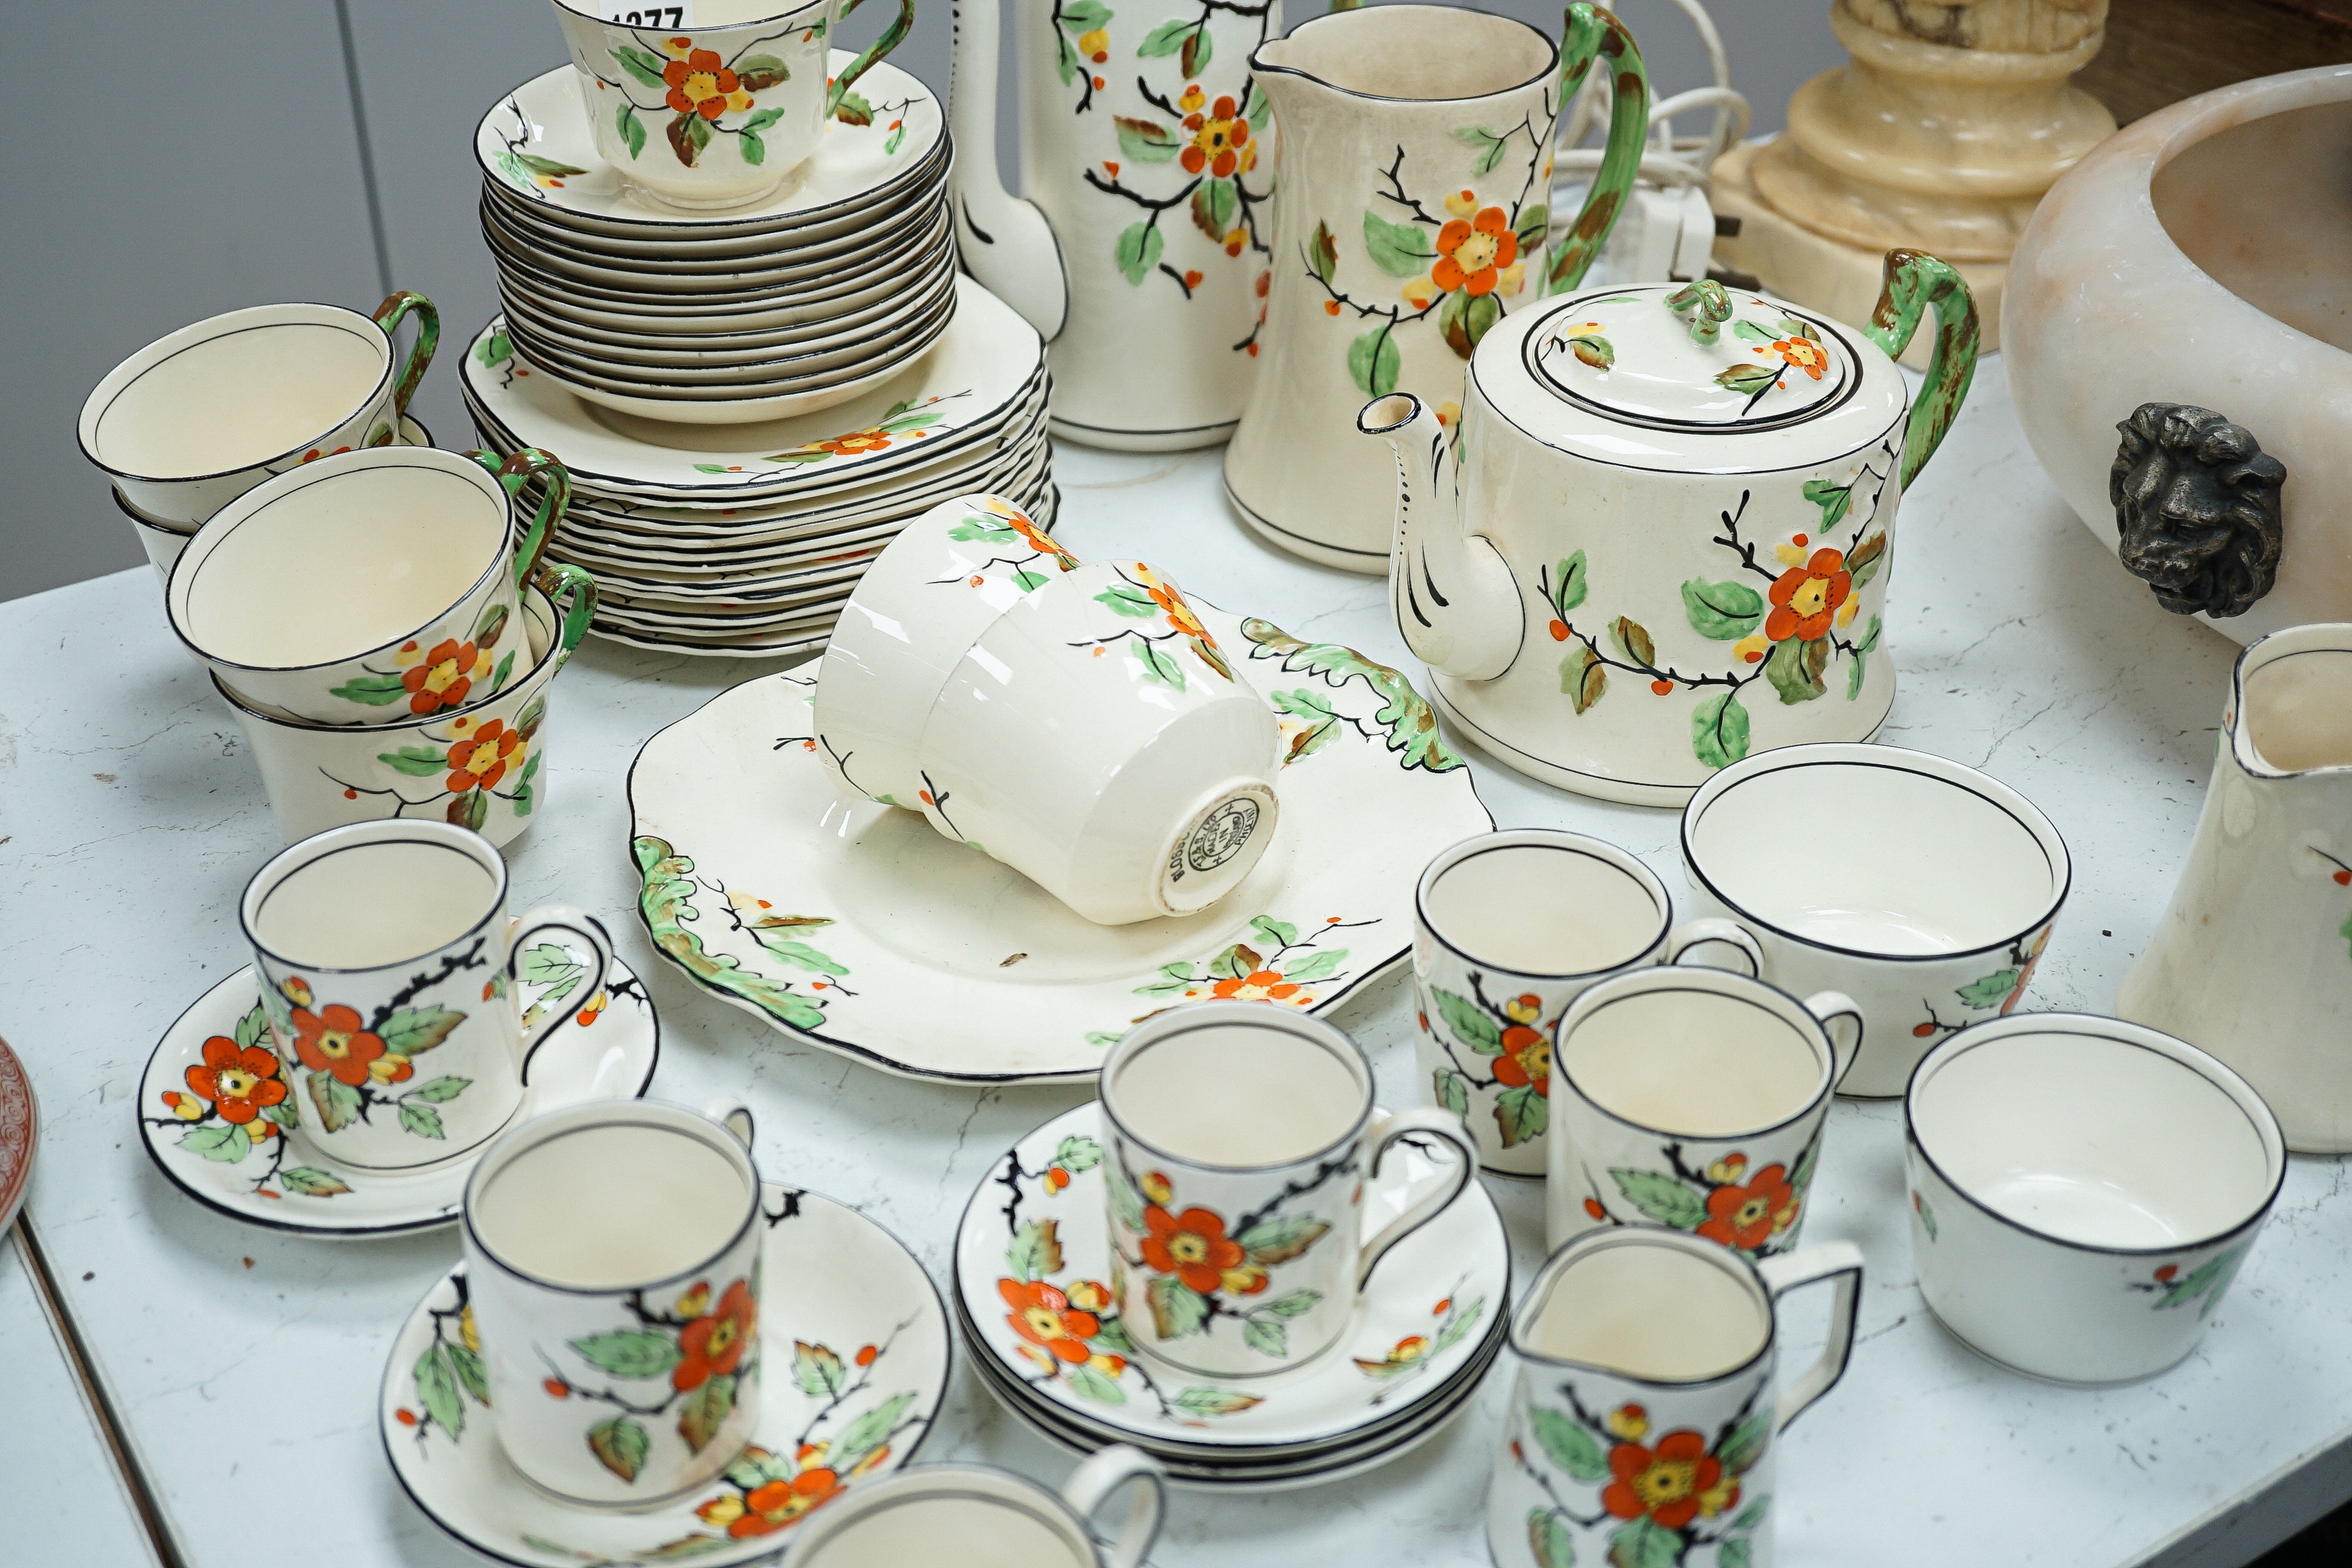 A T. F & S. Blossom pattern tea and coffee service